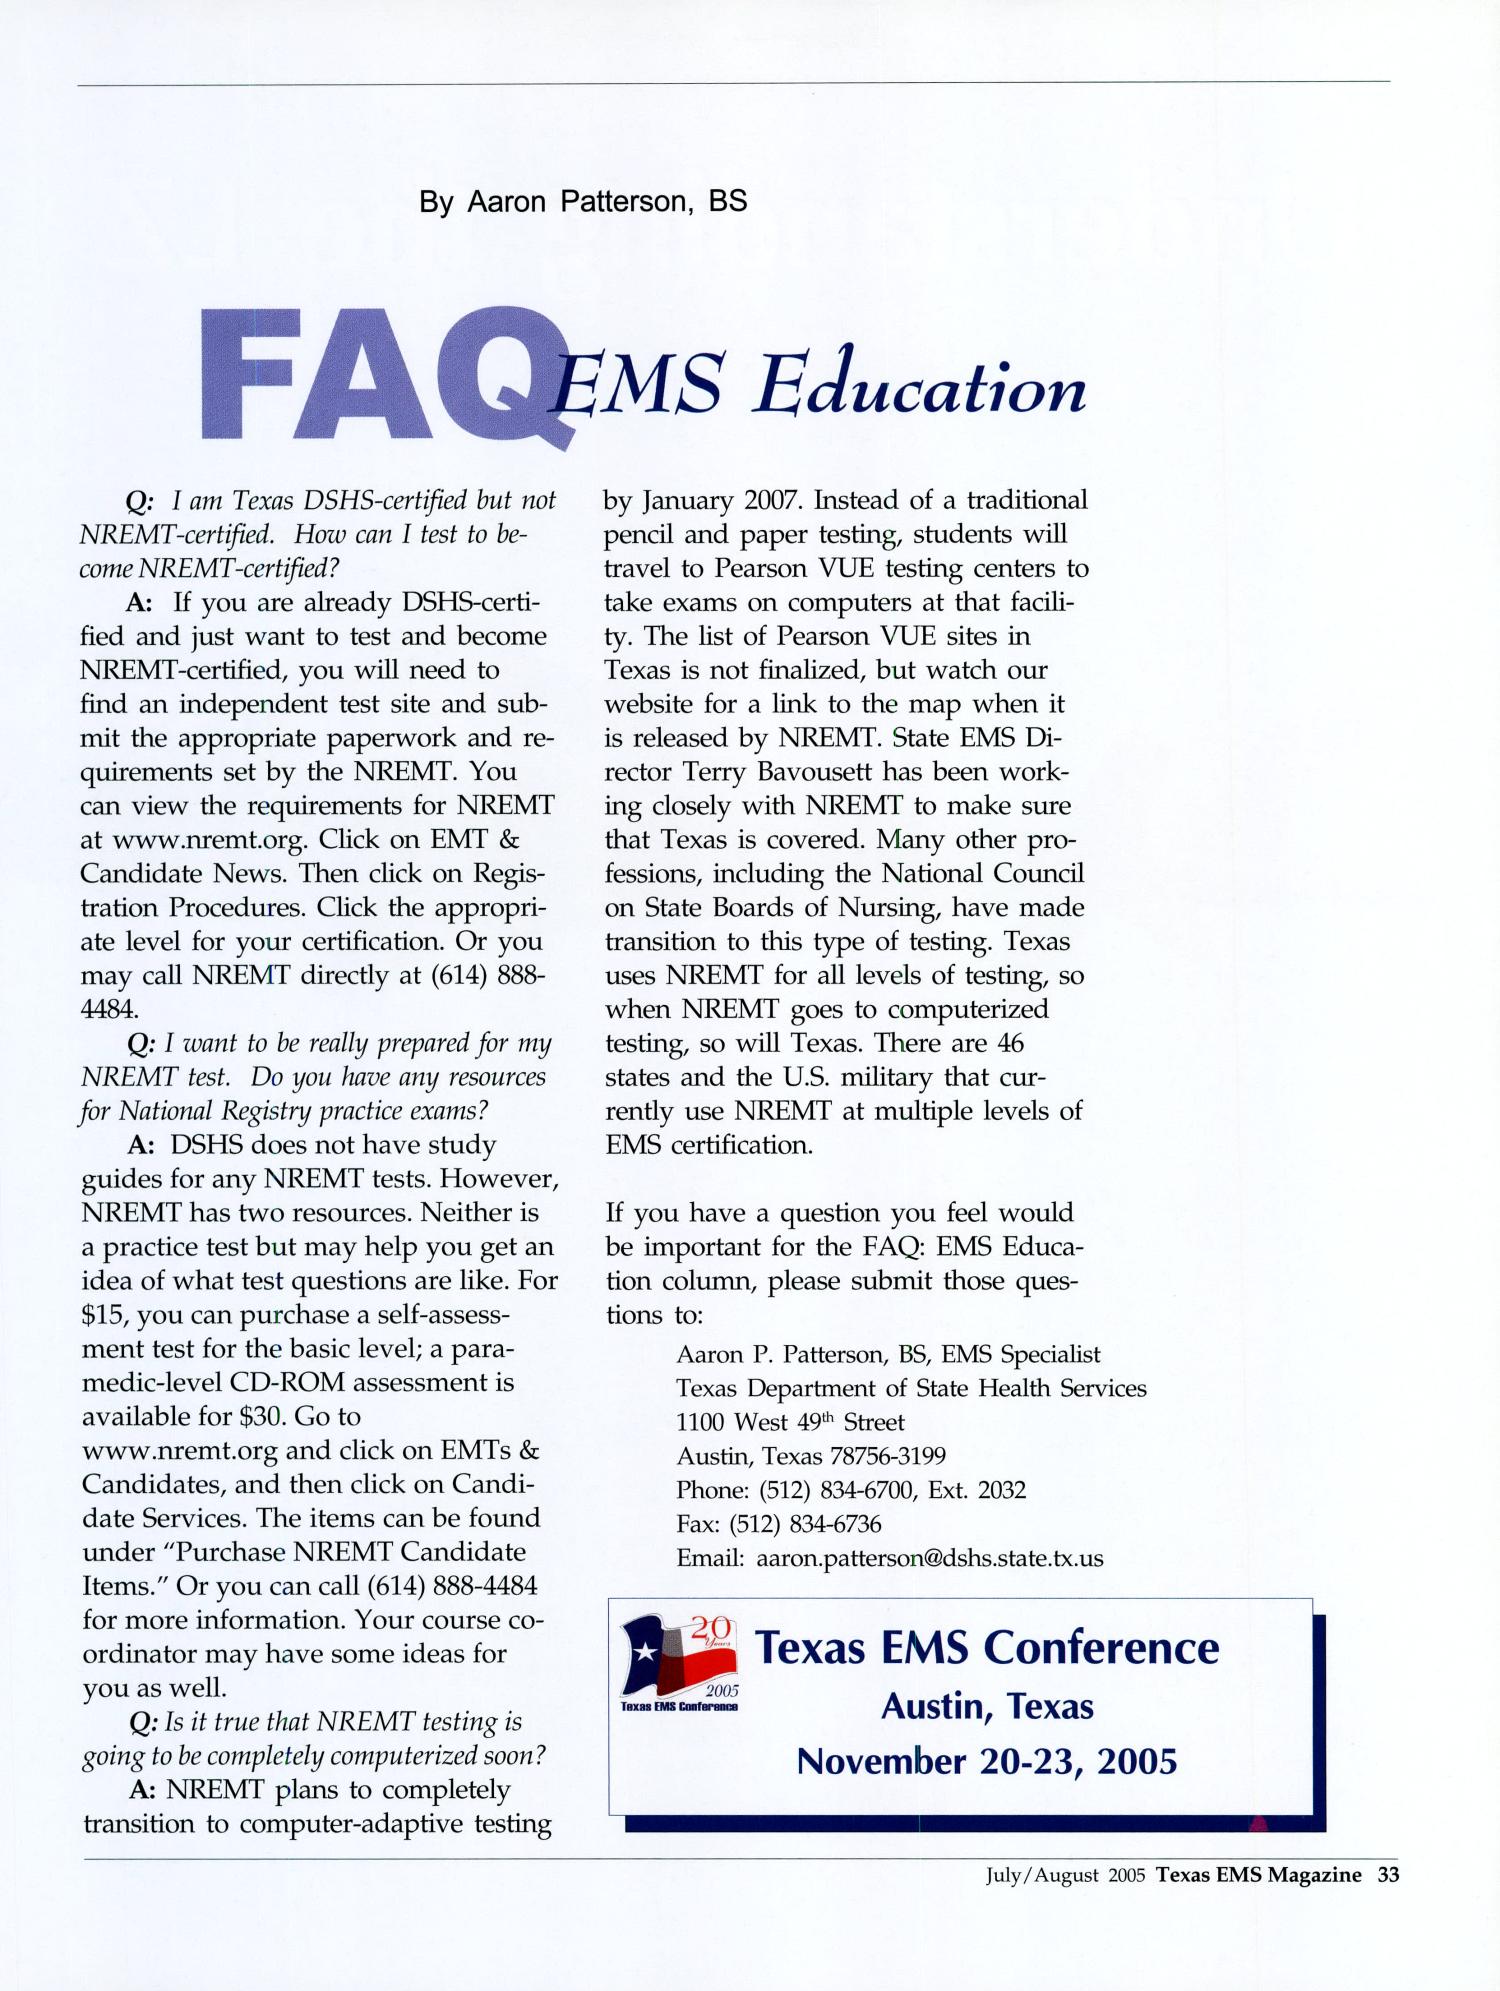 Texas EMS Magazine, Volume 26, Number 4, July/August 2005
                                                
                                                    33
                                                